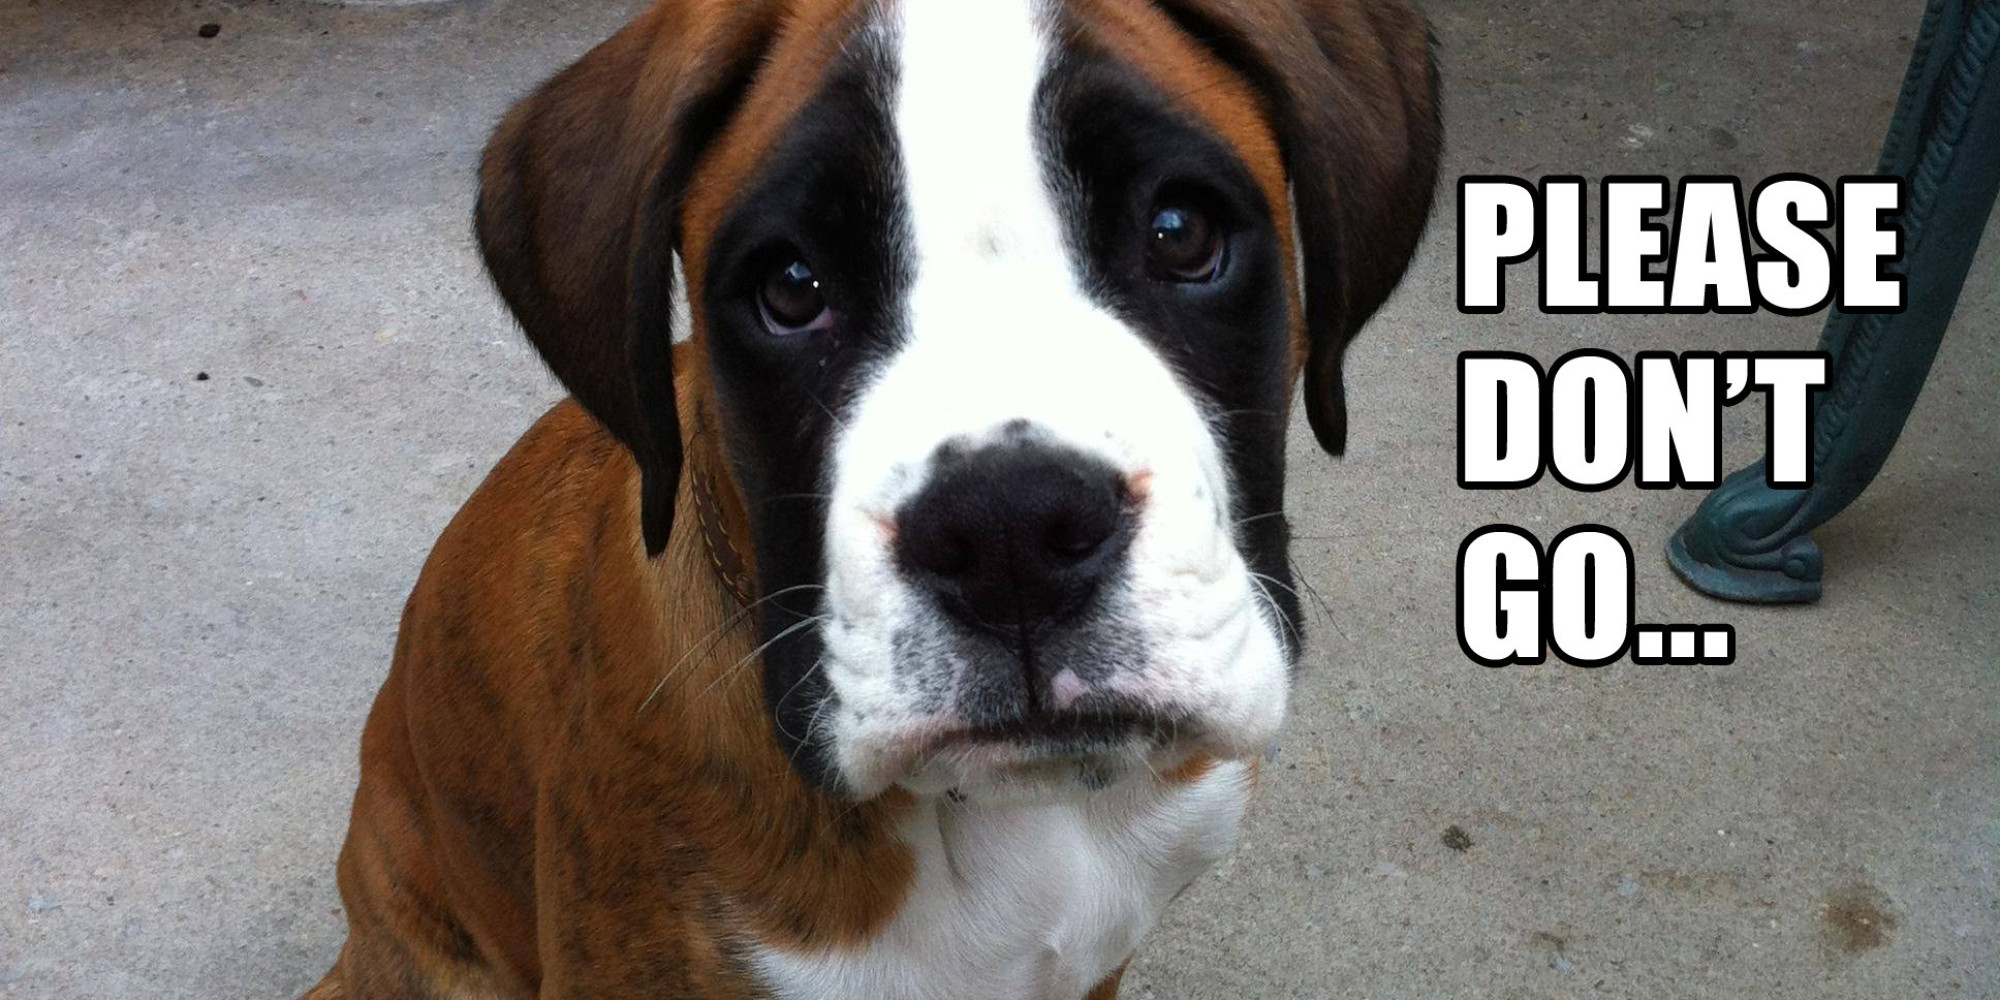 www.huffingtonpost.com. funny dramatic animals dogs guilt puppy trip eyes f...